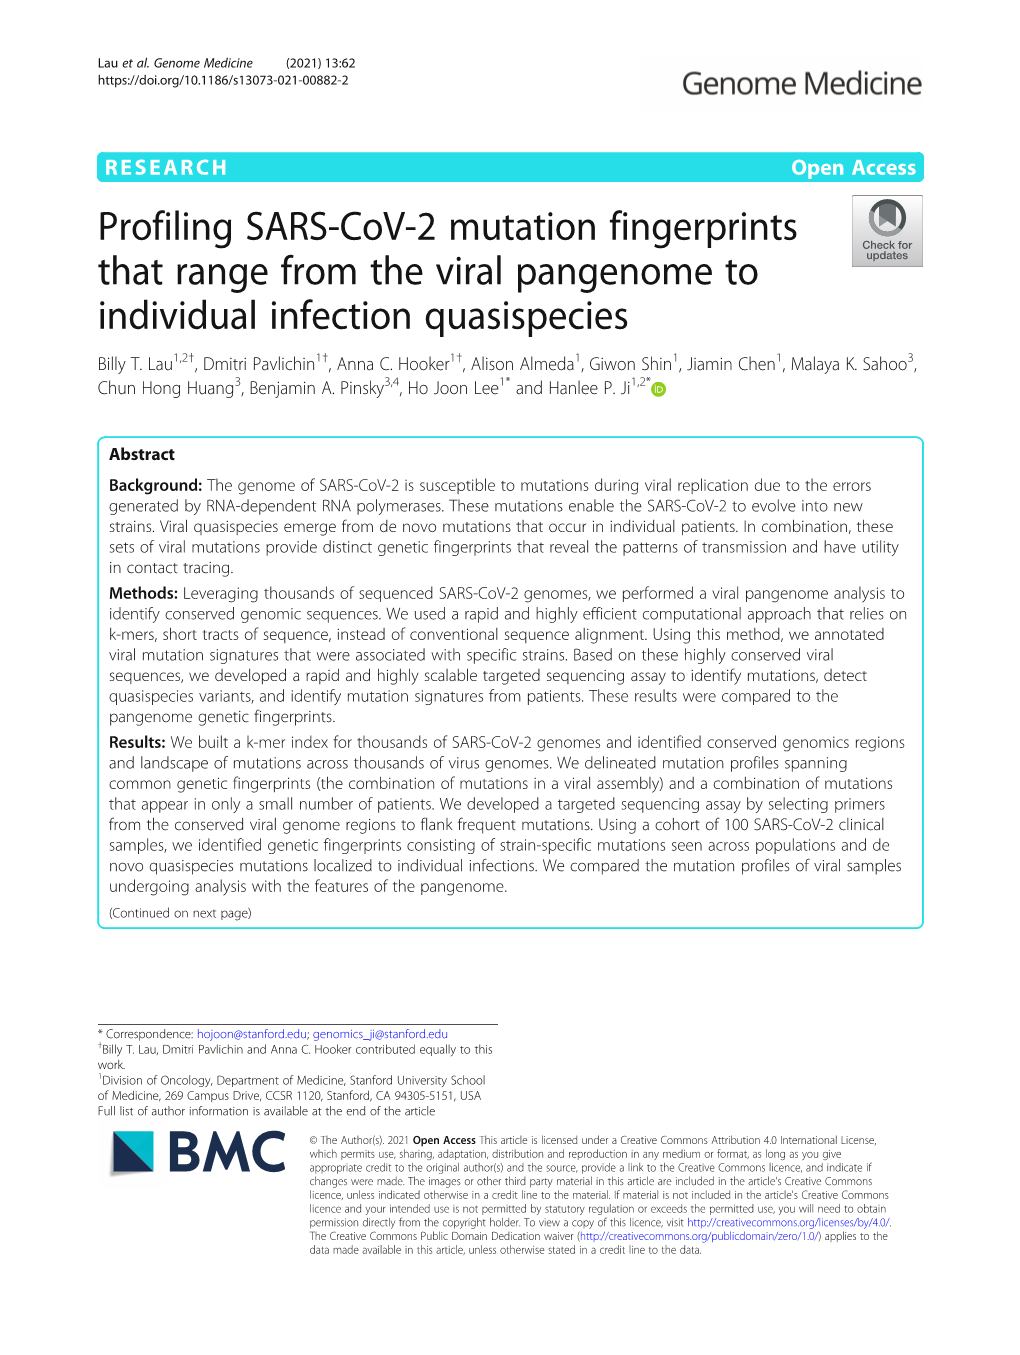 Profiling SARS-Cov-2 Mutation Fingerprints That Range from the Viral Pangenome to Individual Infection Quasispecies Billy T